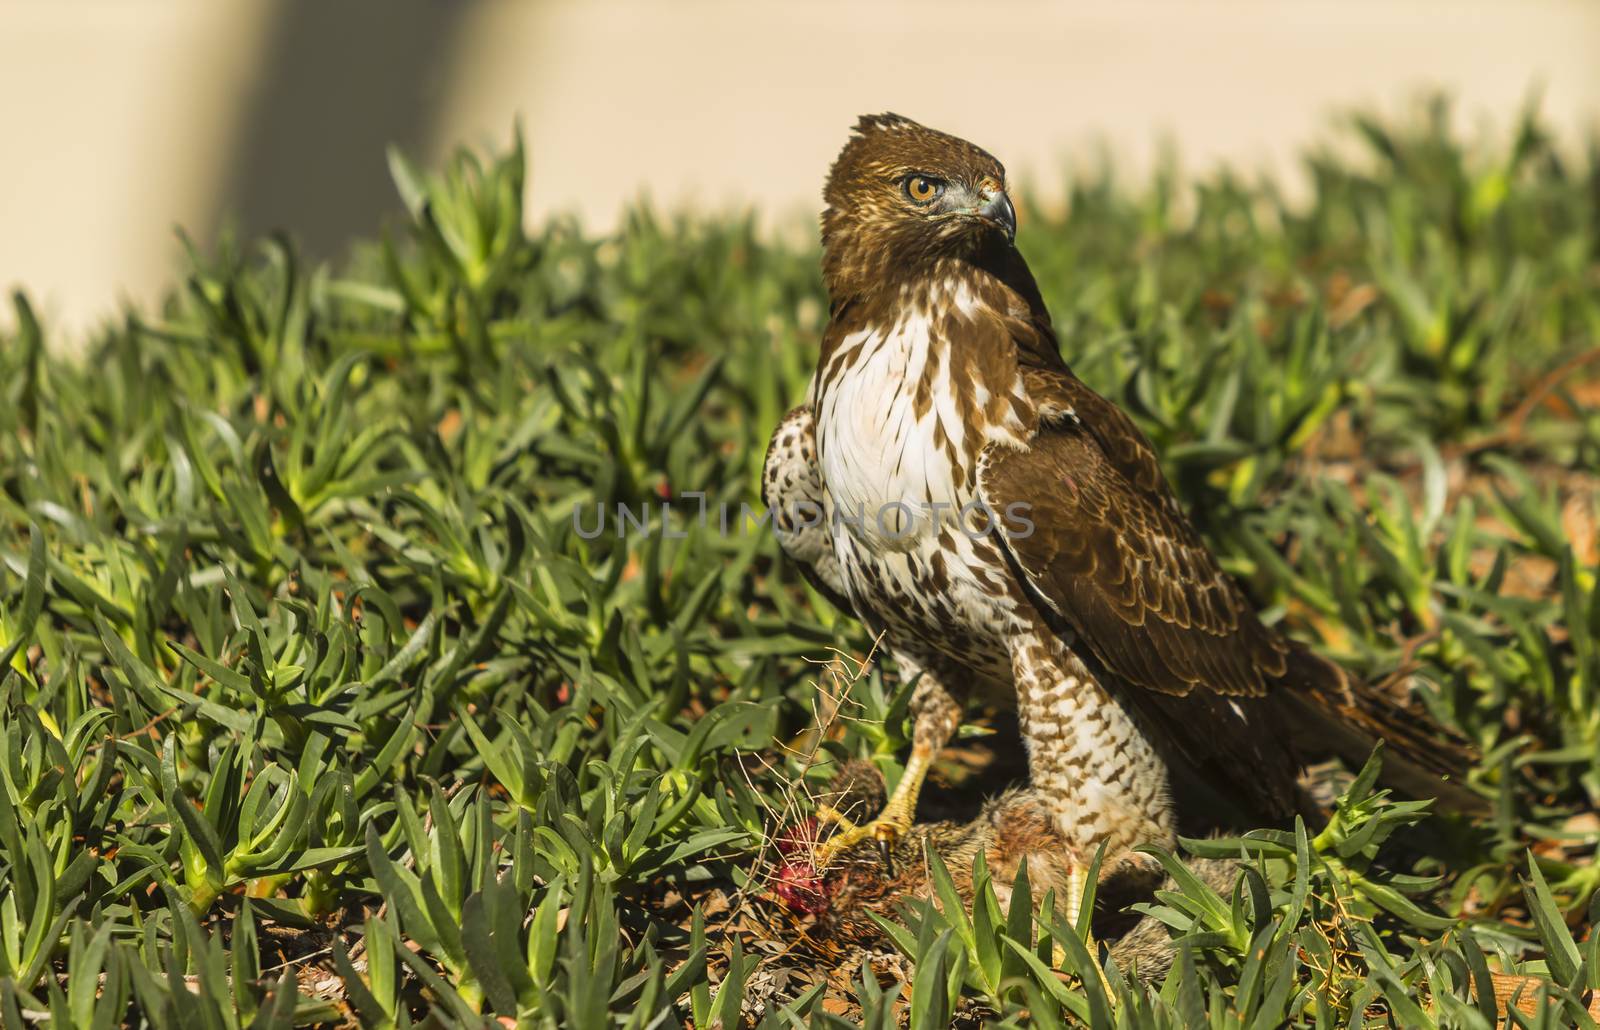 Young Red Tailed Hawk with Prey by Creatista